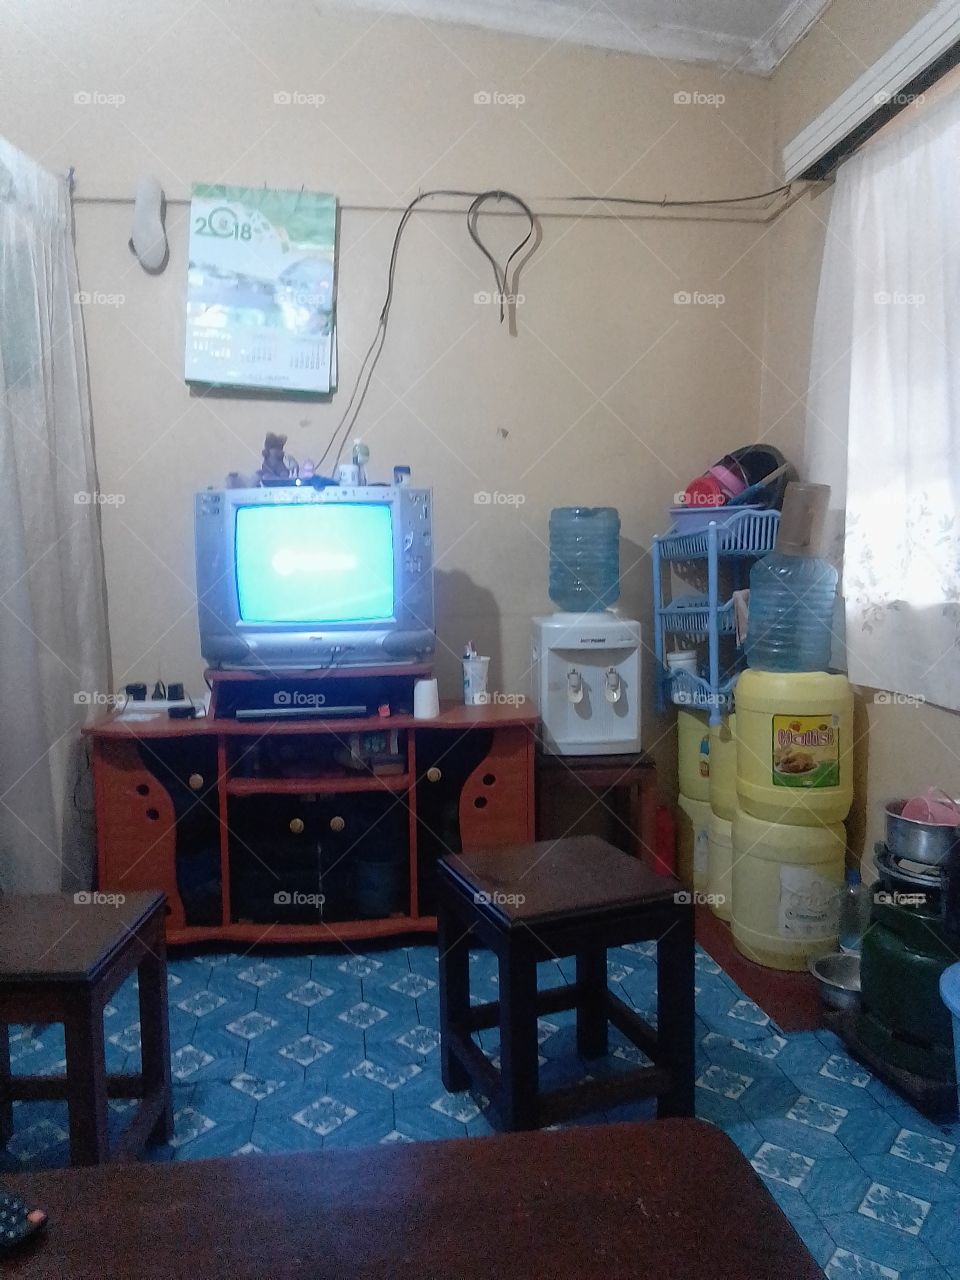 Furniture, household items, dispenser,gas,, curtains,,bottles and cool environment.